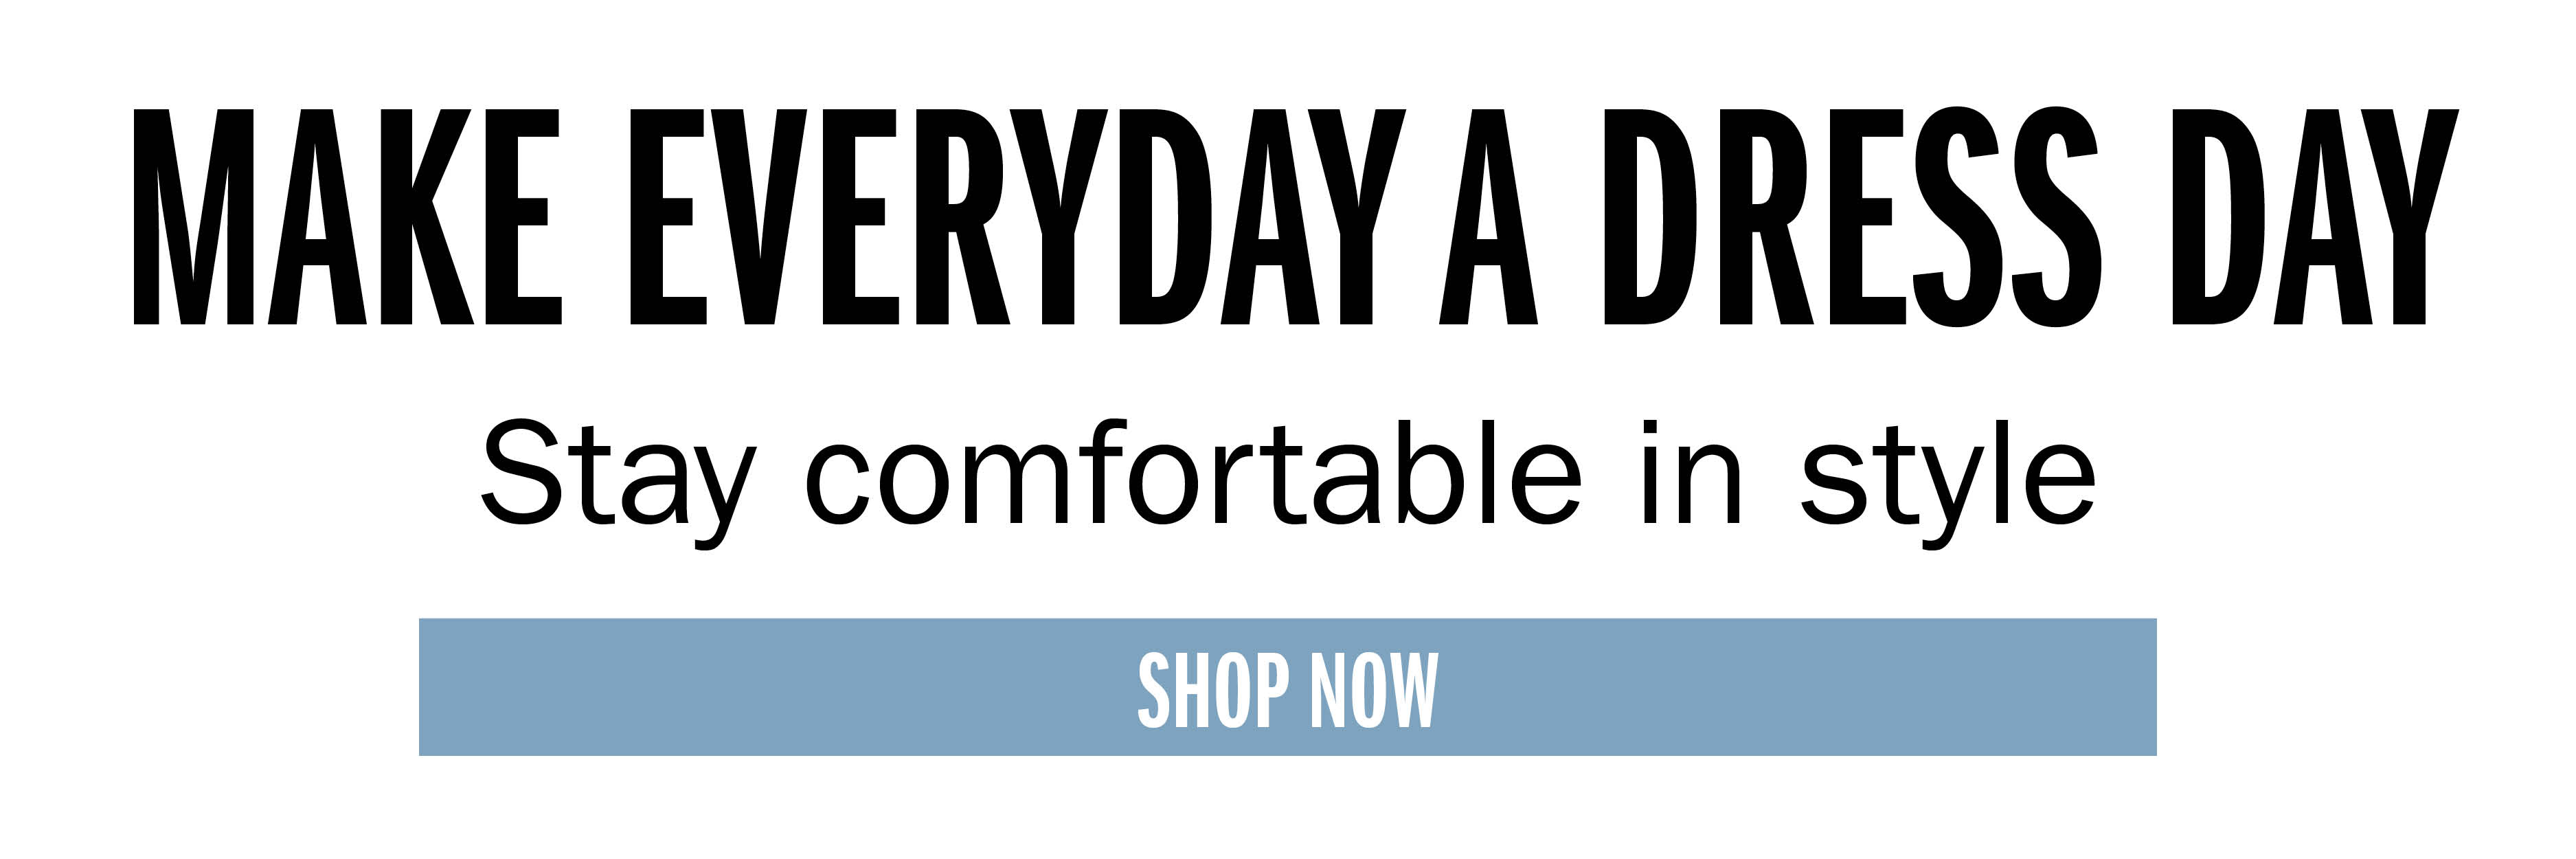 MAKE EVERYDAY A DRESS DAY Stay comfortable in style SHOP NOW